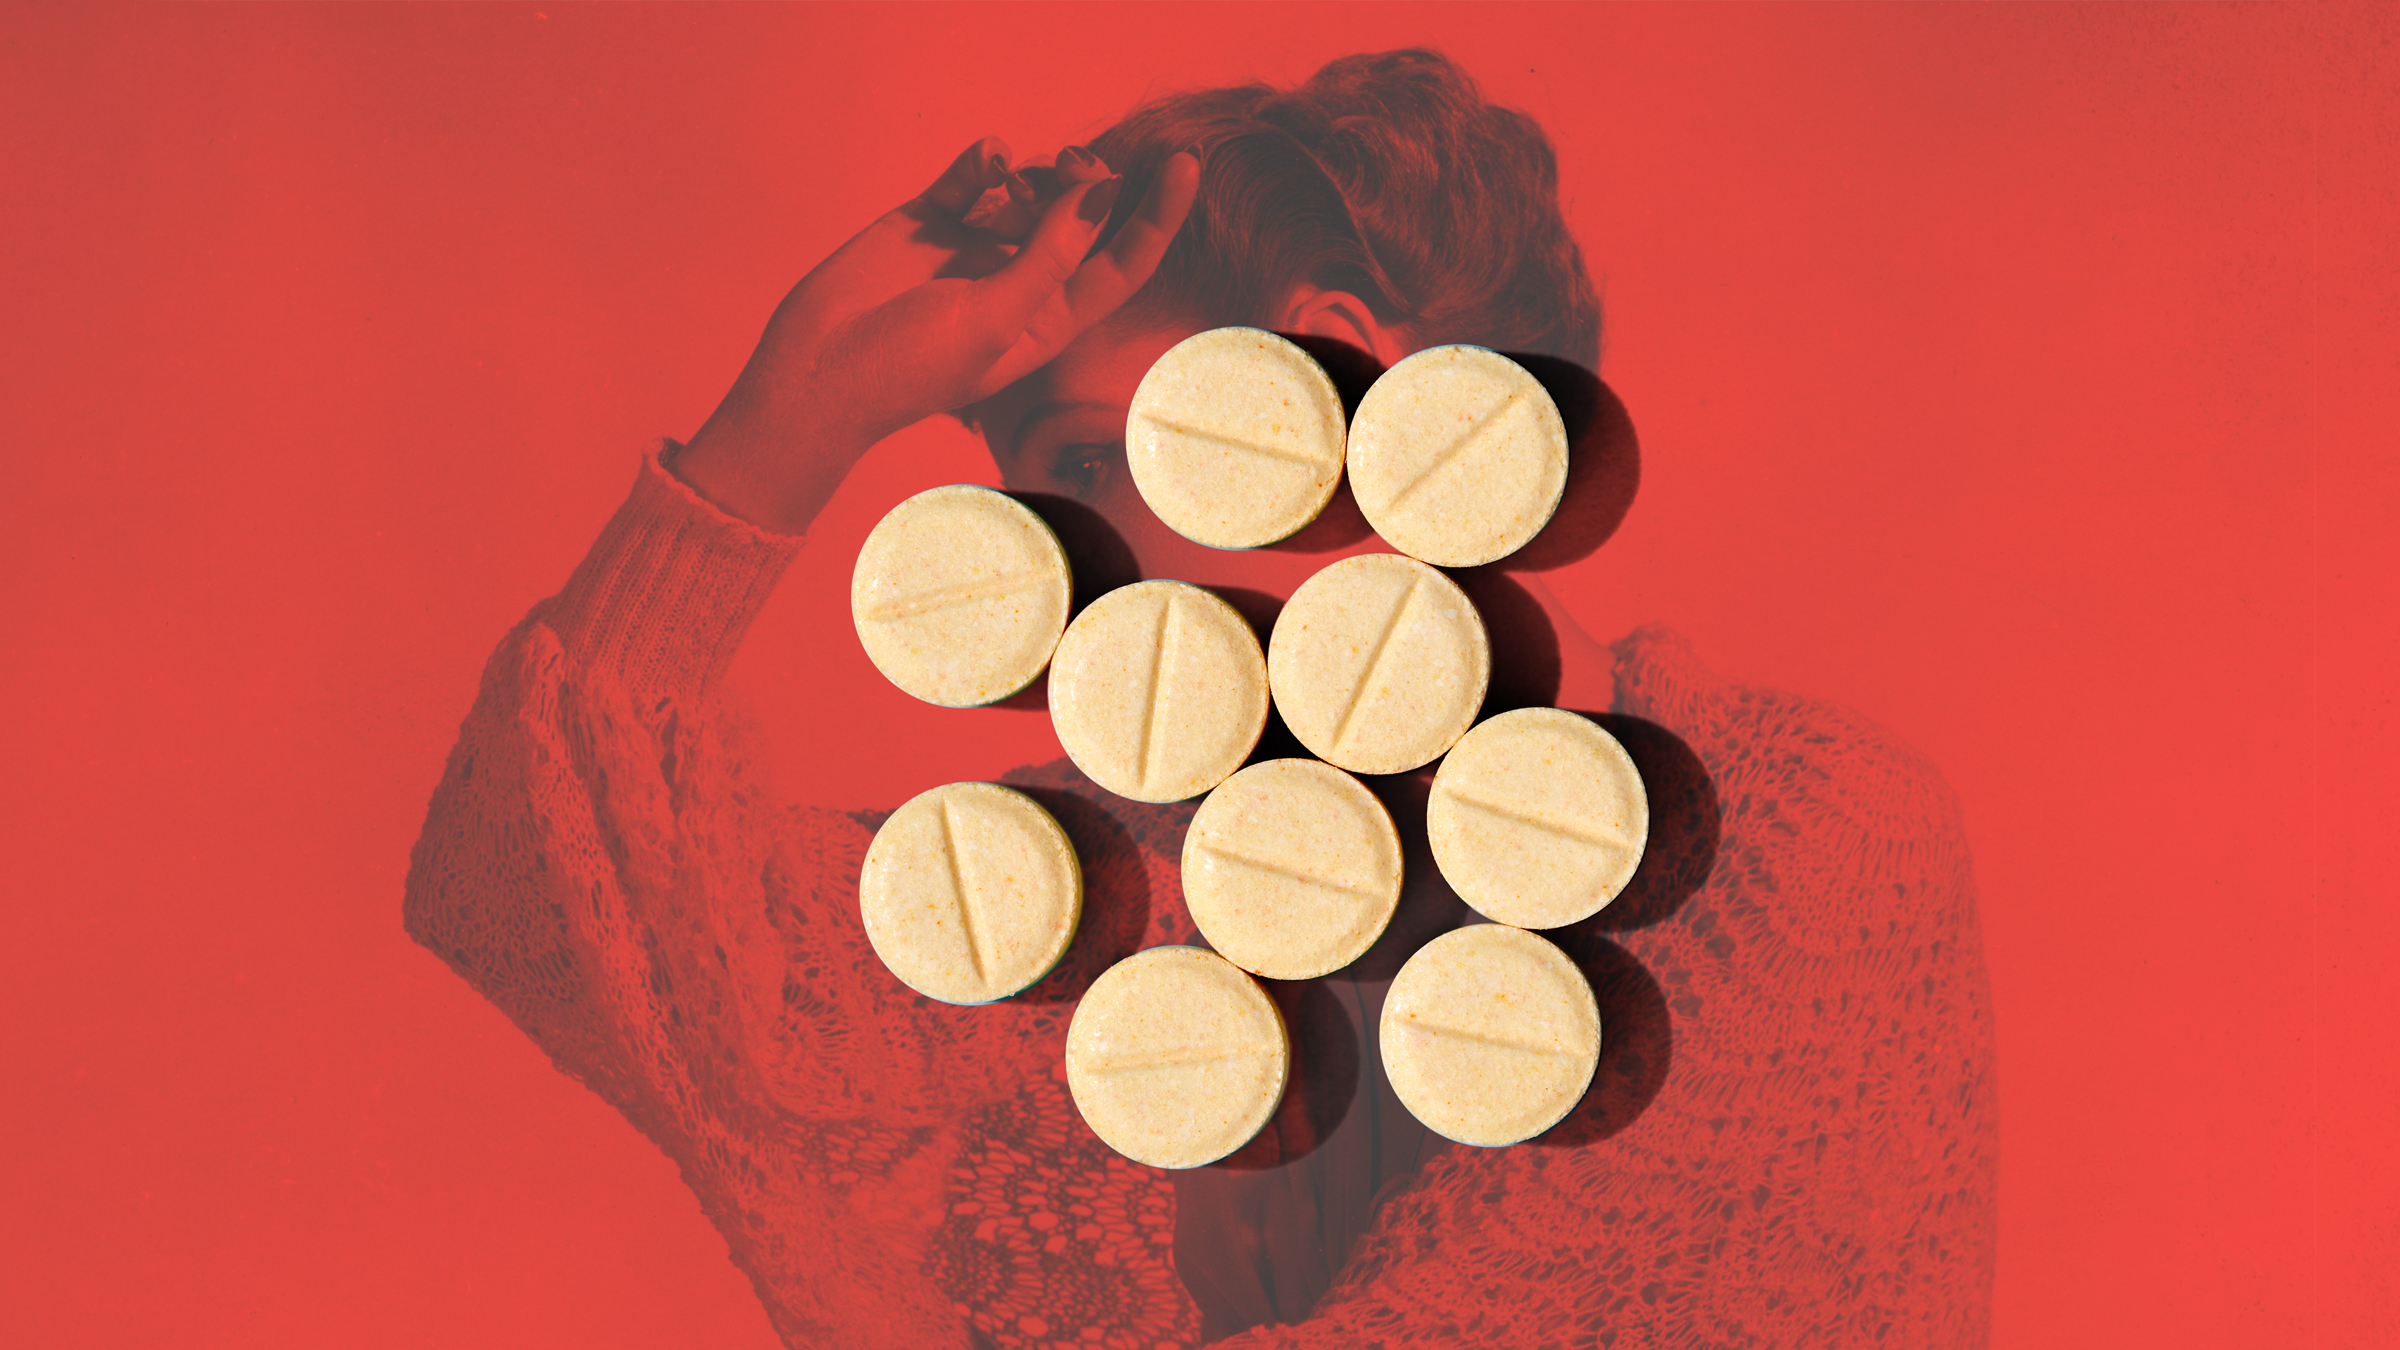 Birth-control pills superimposed over an image of a woman